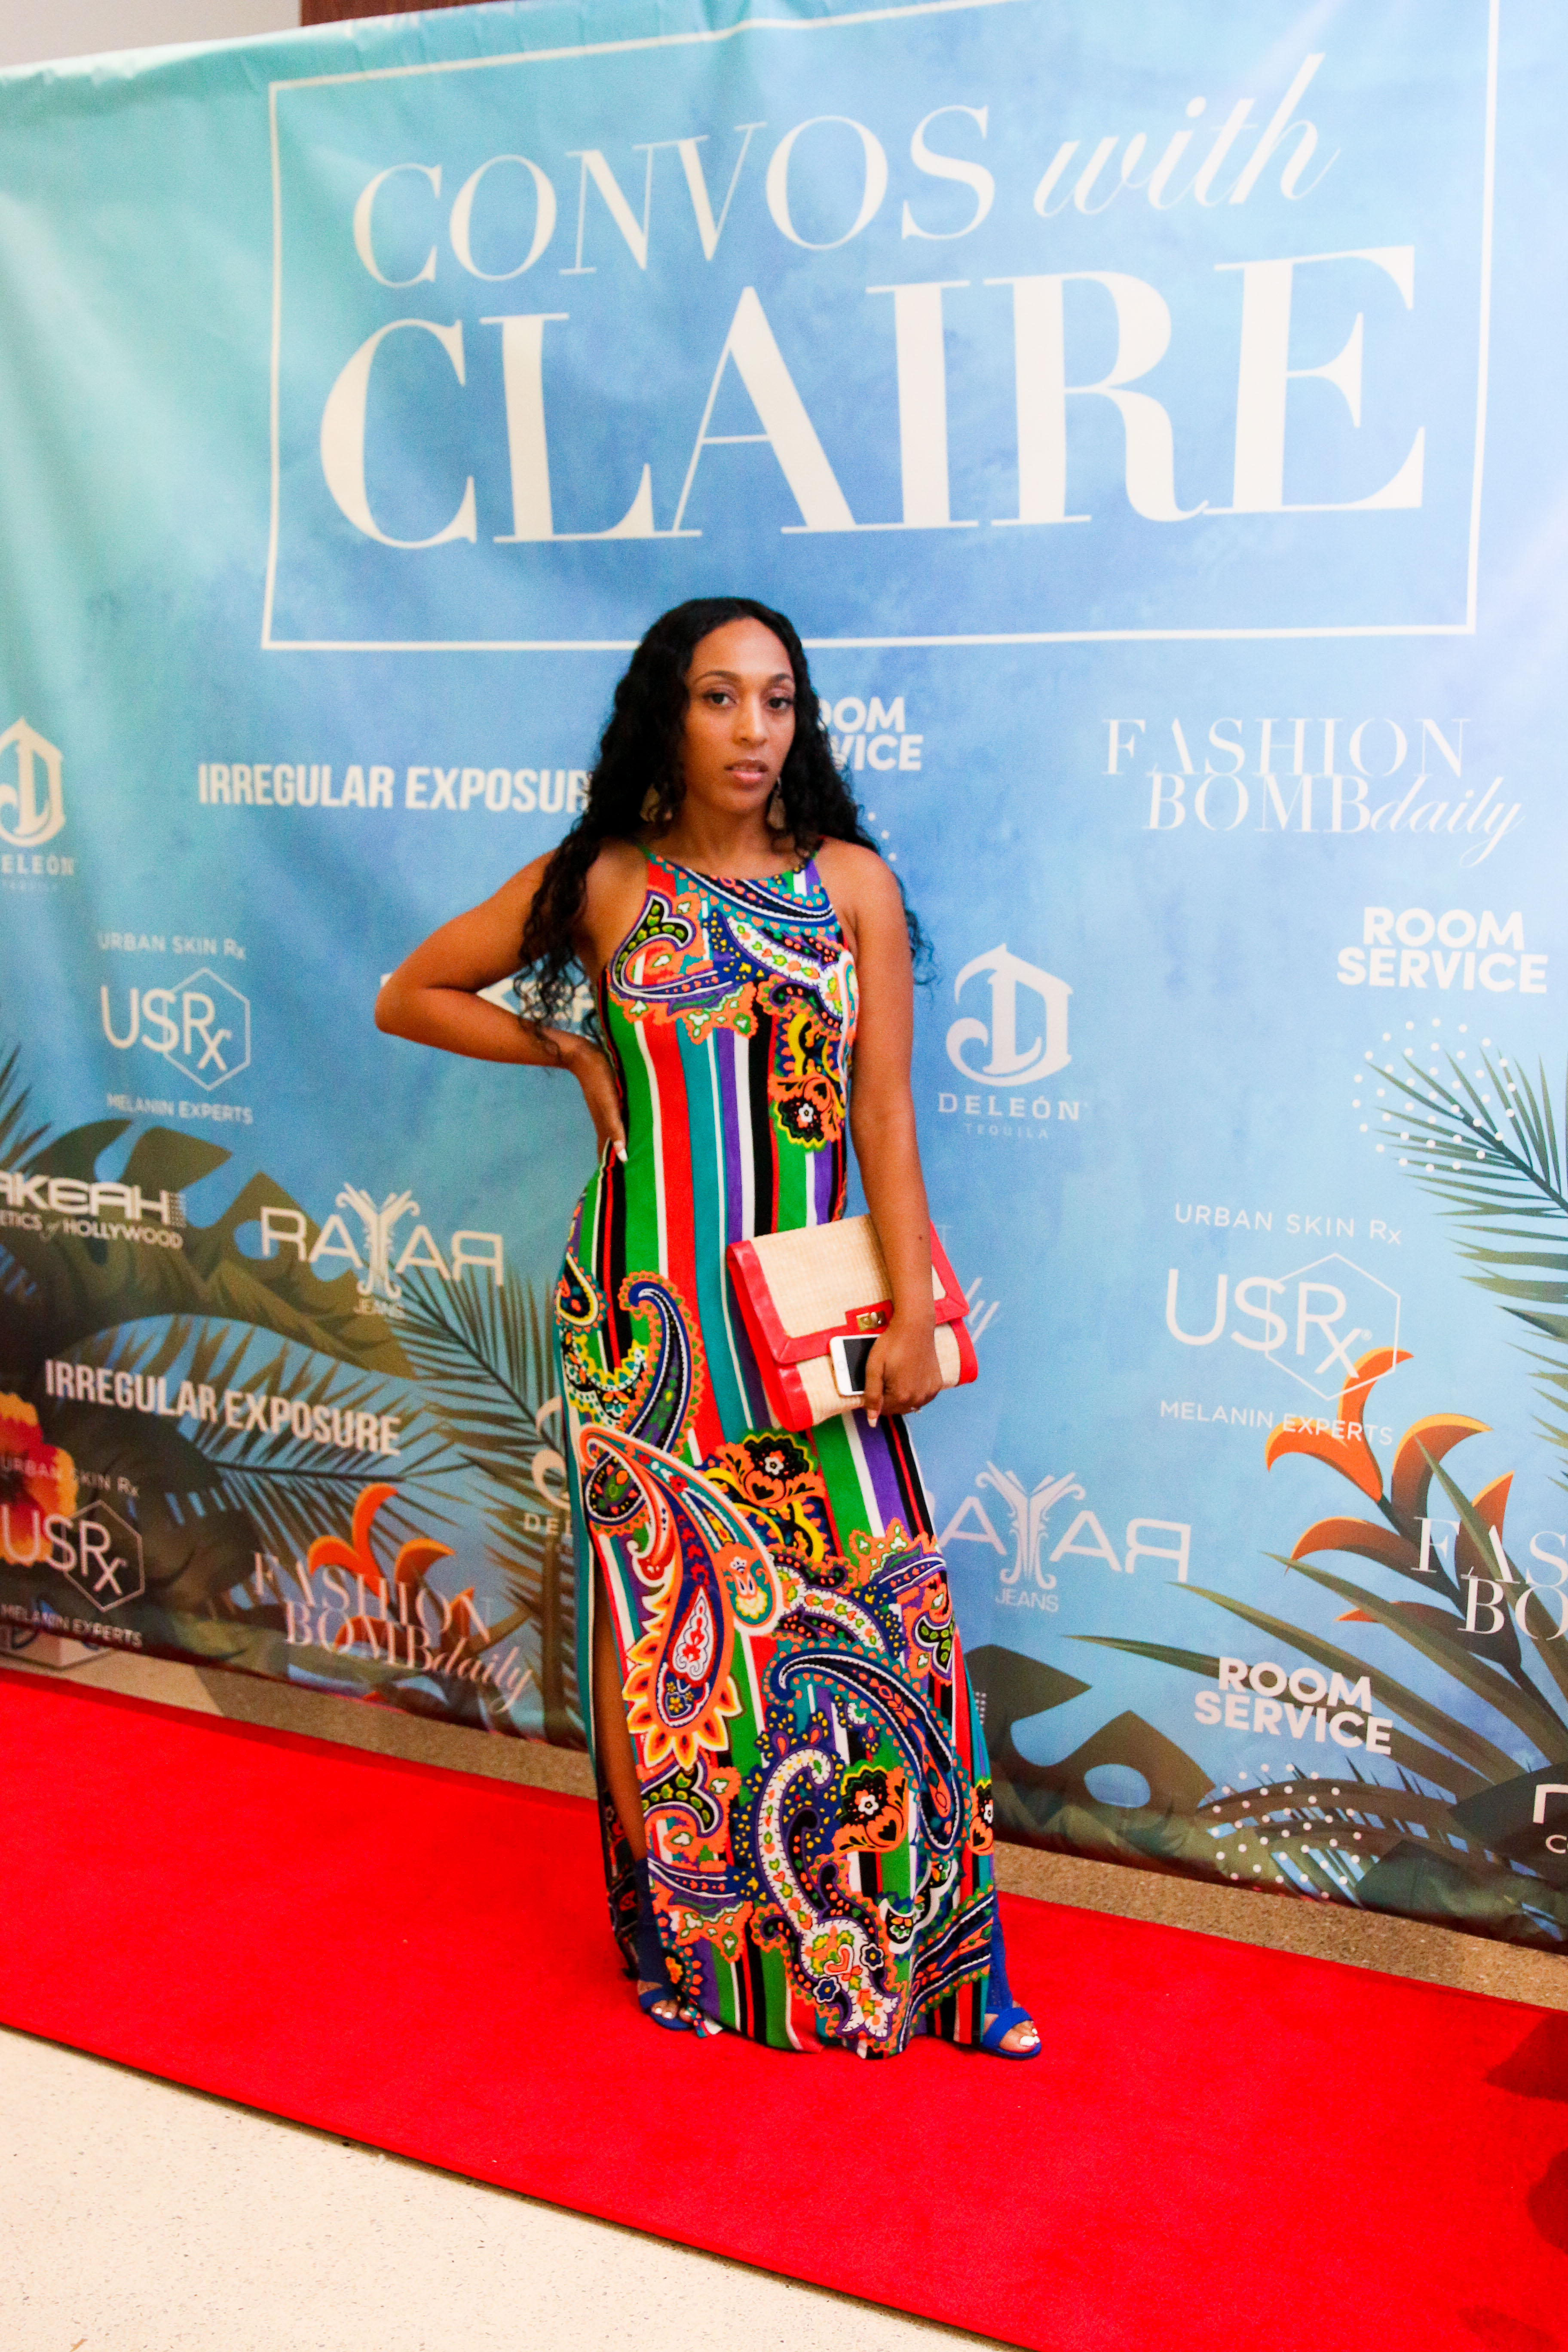 What to Wear to a Tropical Themed Party: Kaftans, Cocktails, and More as  Worn By Guests at Convos with Claire LA – Fashion Bomb Daily